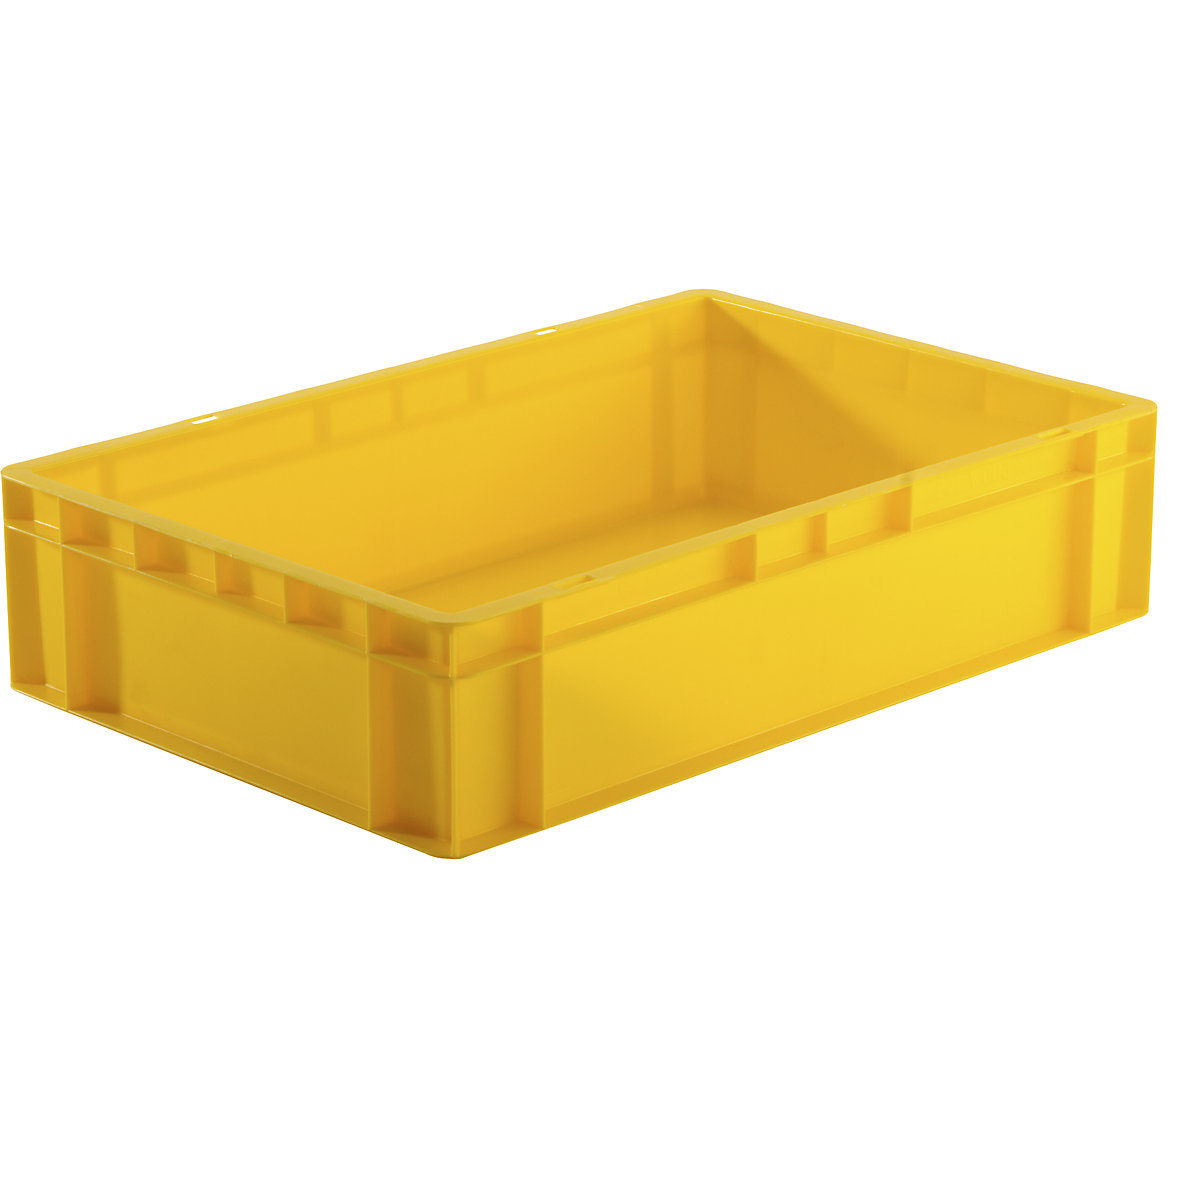 Euro stacking container, closed walls and base, LxWxH 600 x 400 x 145 mm, yellow, pack of 5-8